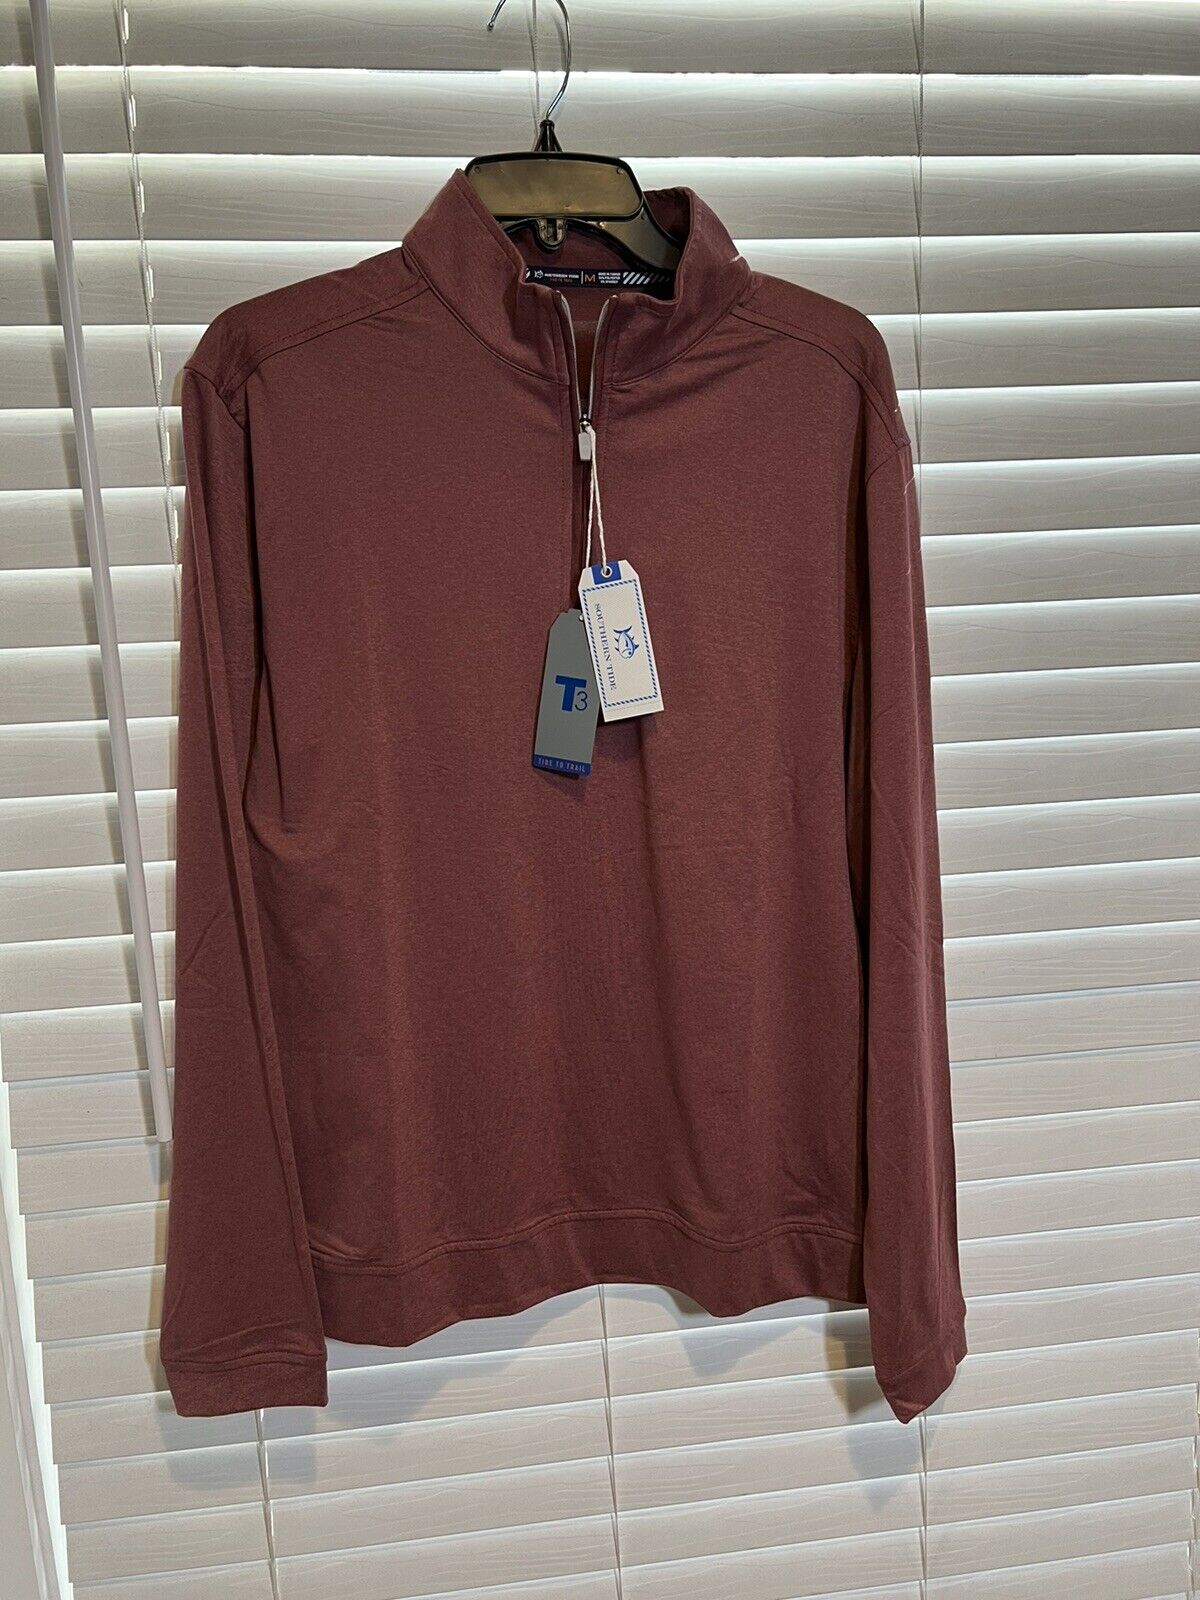 Southern Tide Tide to Trail 1/4 Zip Pullover - NWT - M - Sweats & hoodies